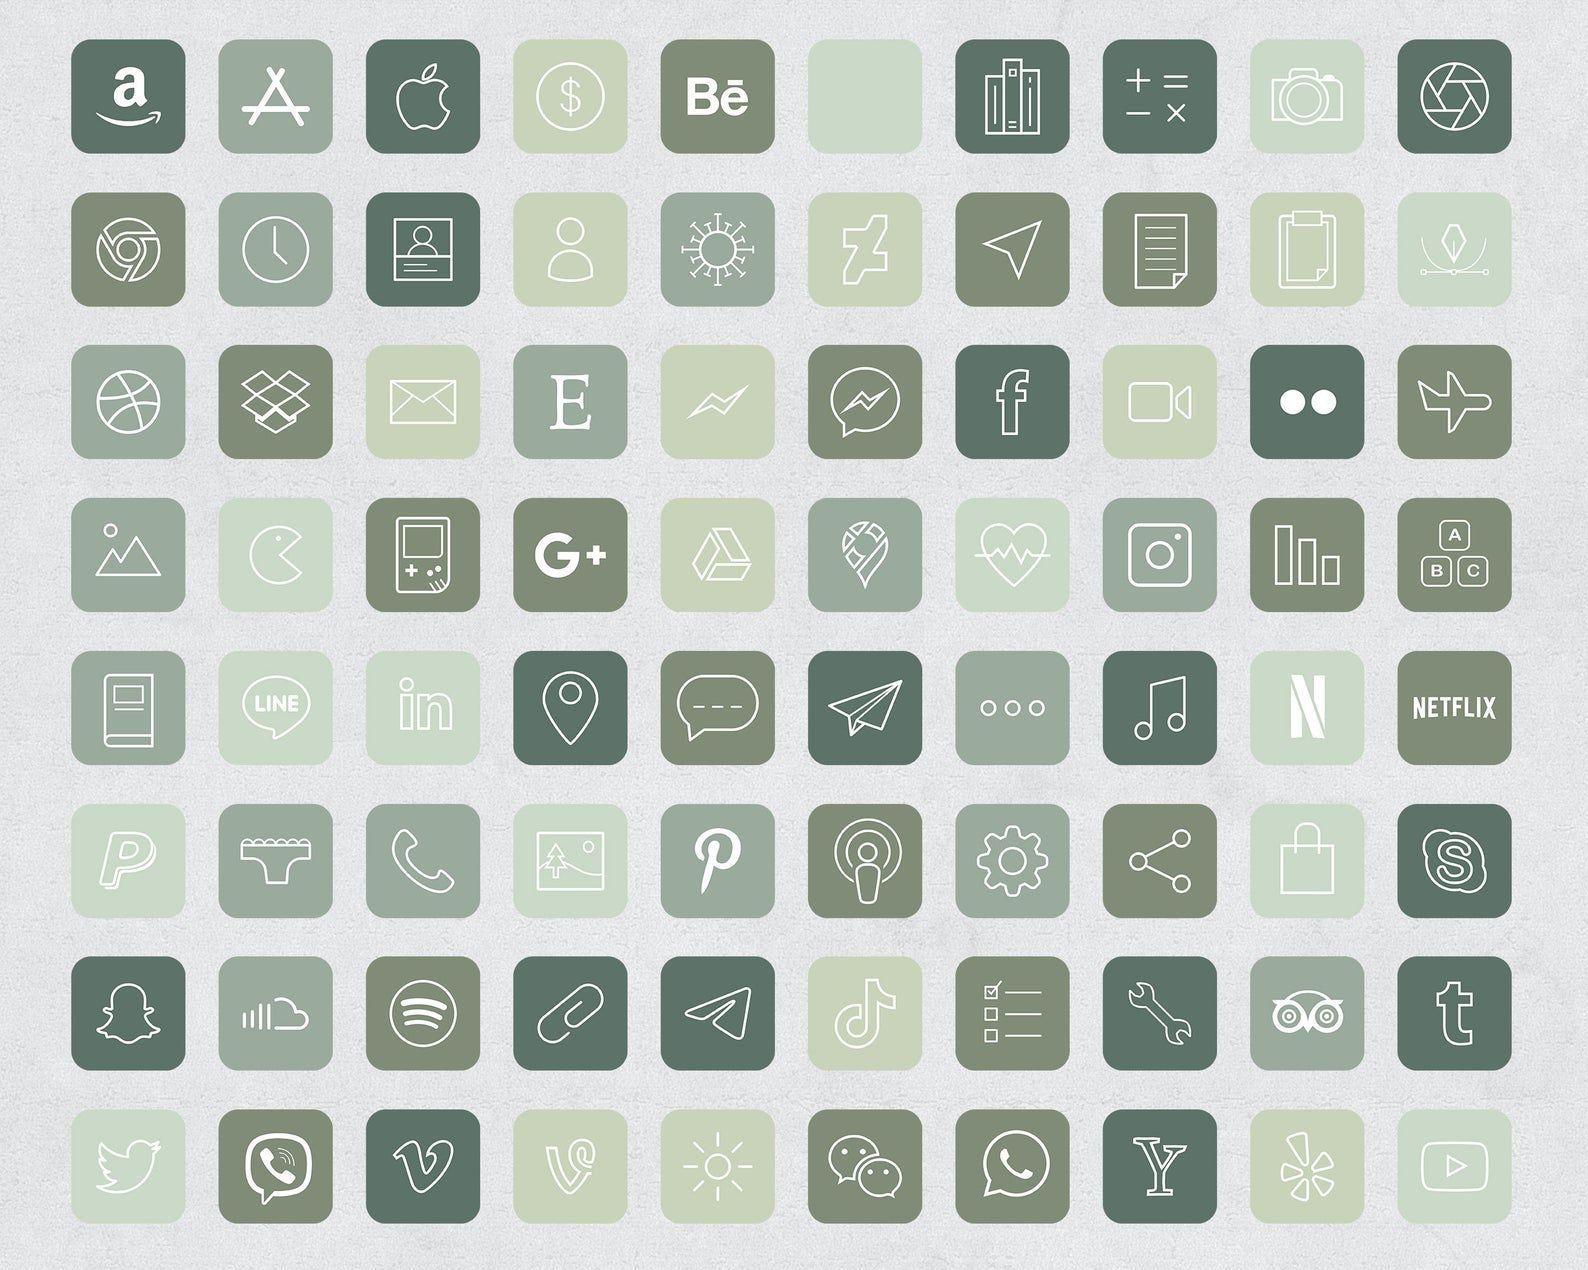 Forest Green Aesthetic iOS 14 App Icon / Social Media icons iOS14 / iPhone Icon App Pack / Minimalist Icon / Green Aesthetic Icon. iPhone photo app, iPhone wallpaper app, App icon